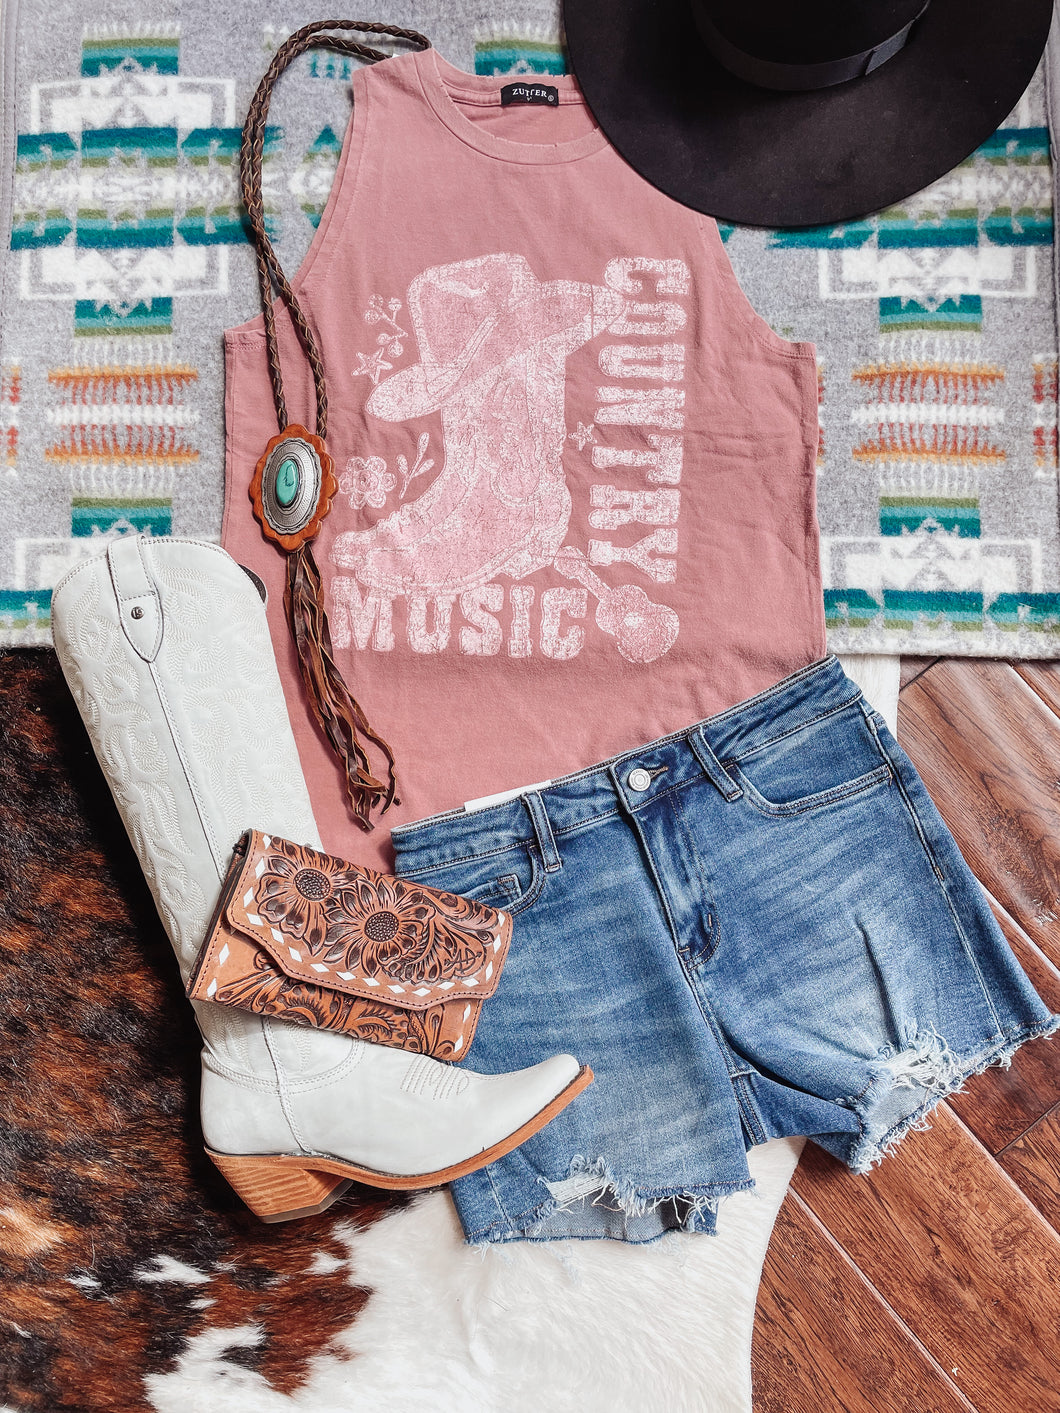 country music tank